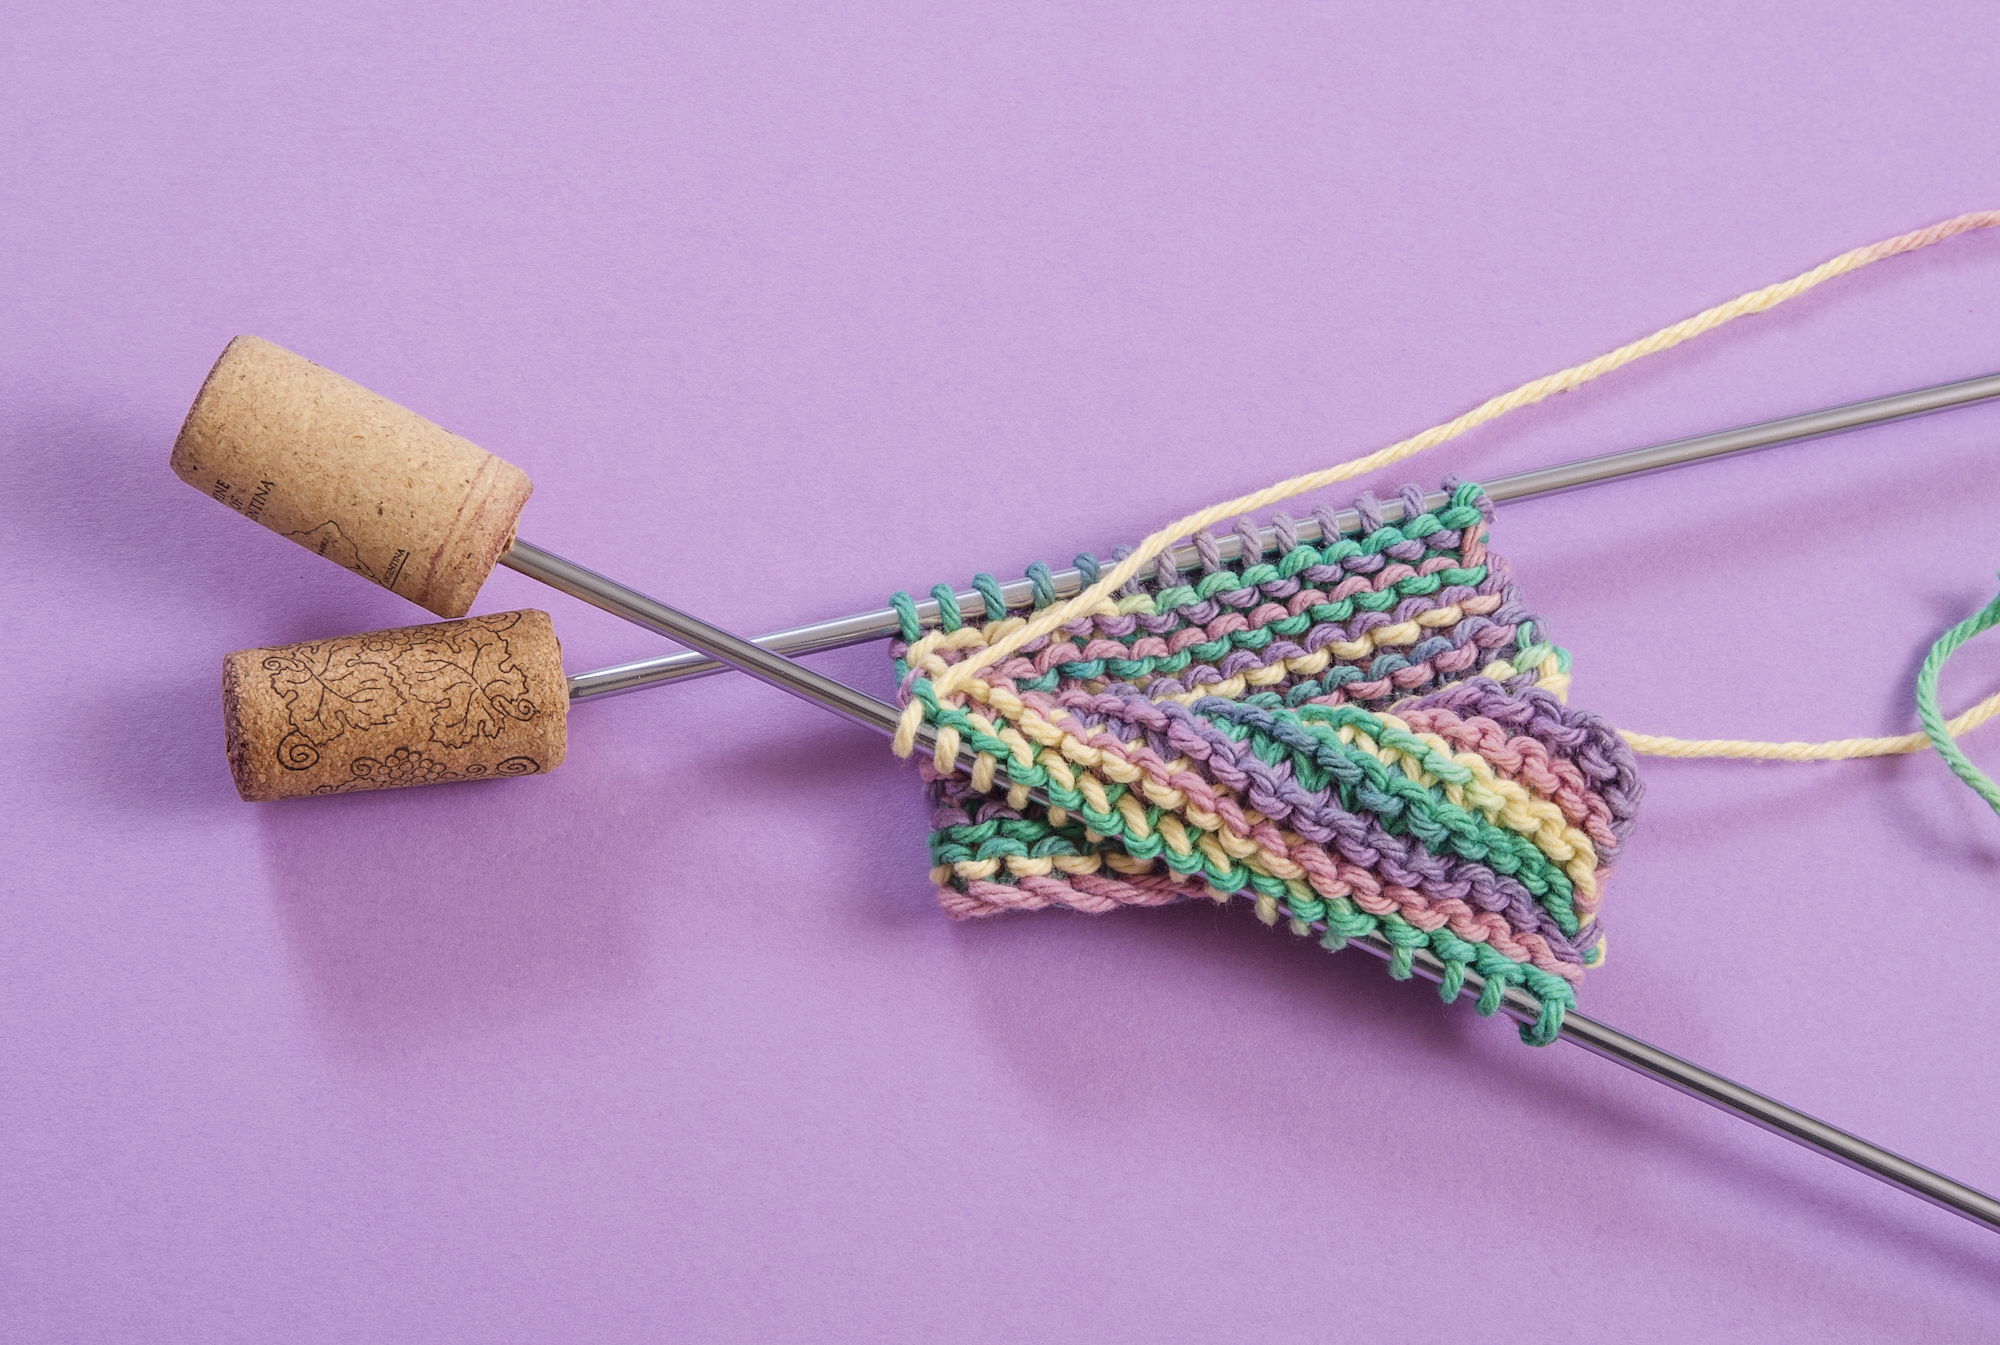 Protect Your Knitting Needle Tips